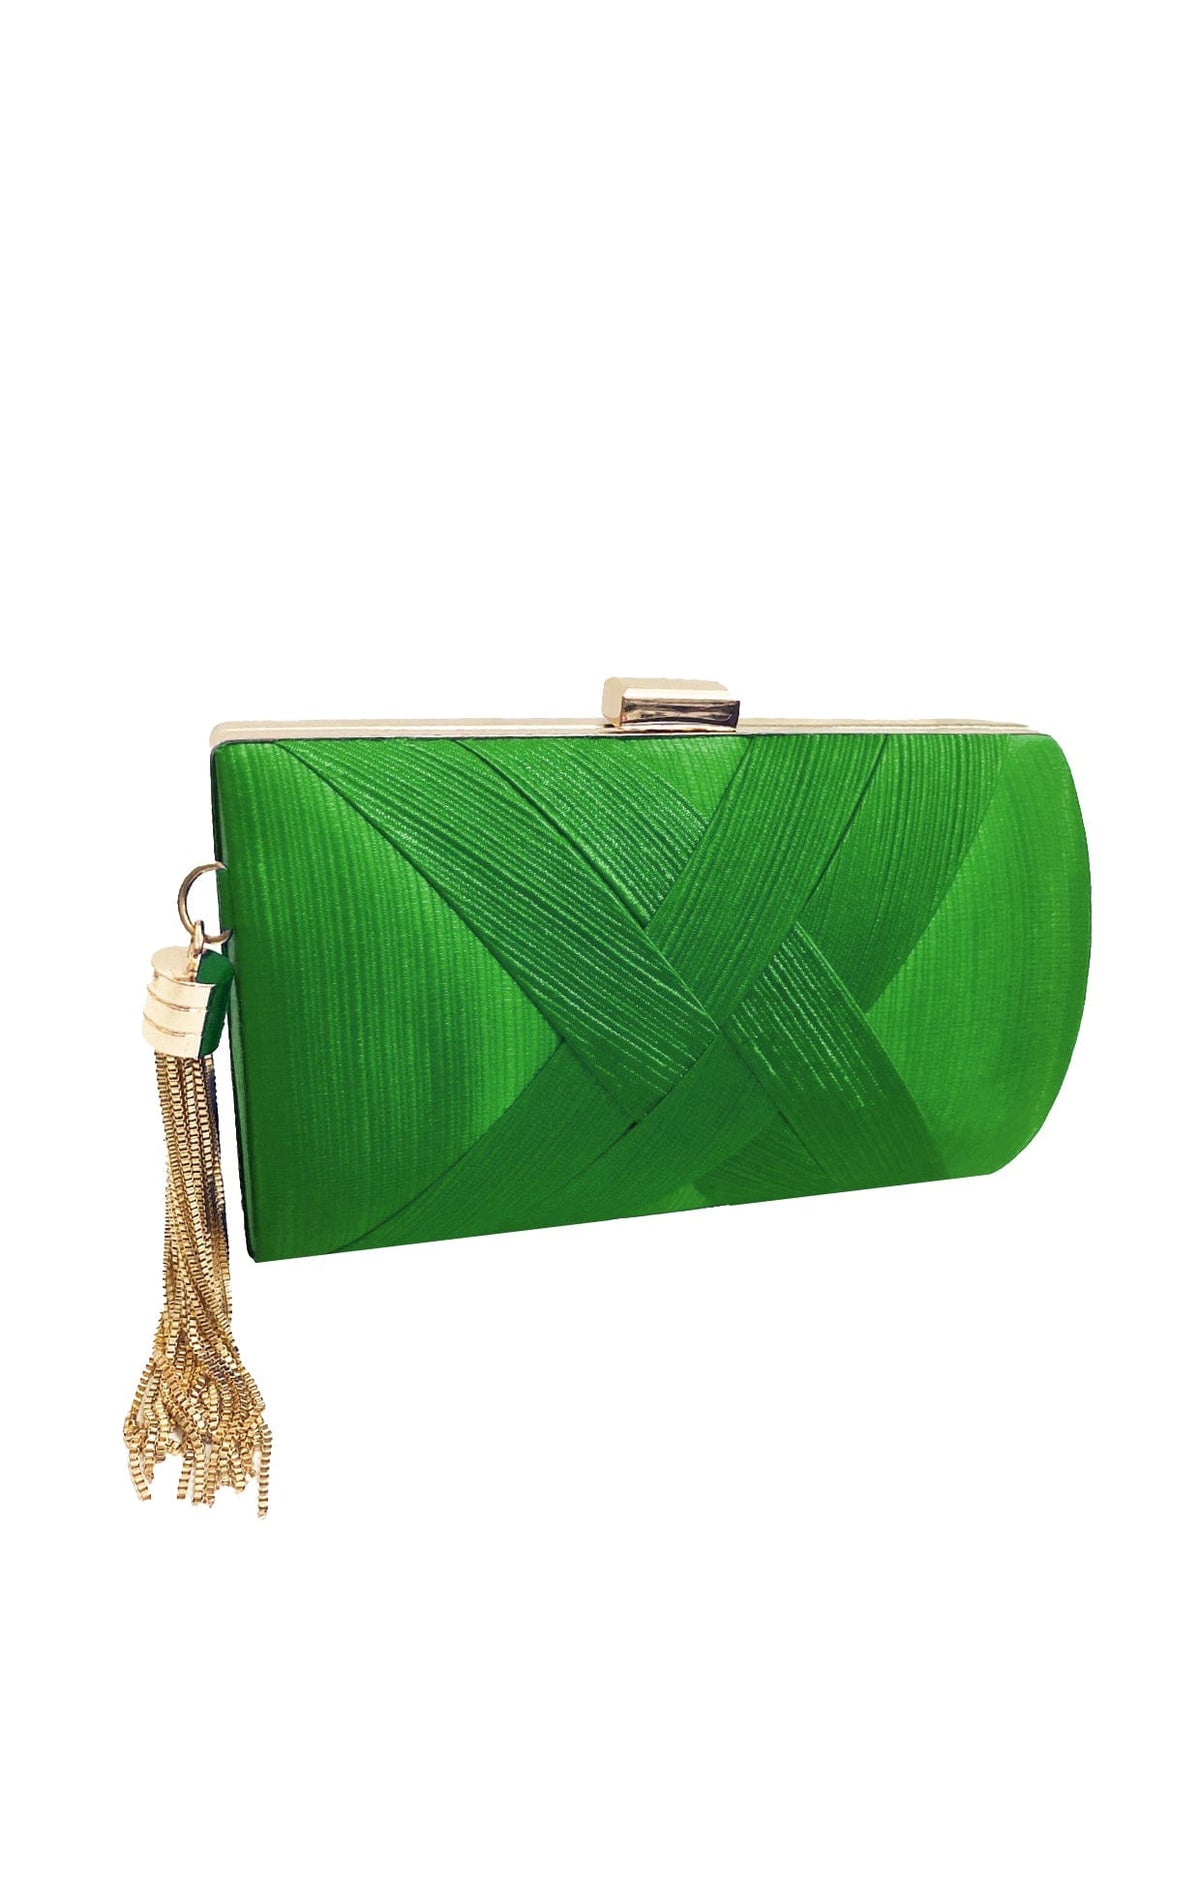 ACCESSORIES Bags Clutches One Size / Green DEANNA EVENING BAG IN GREEN